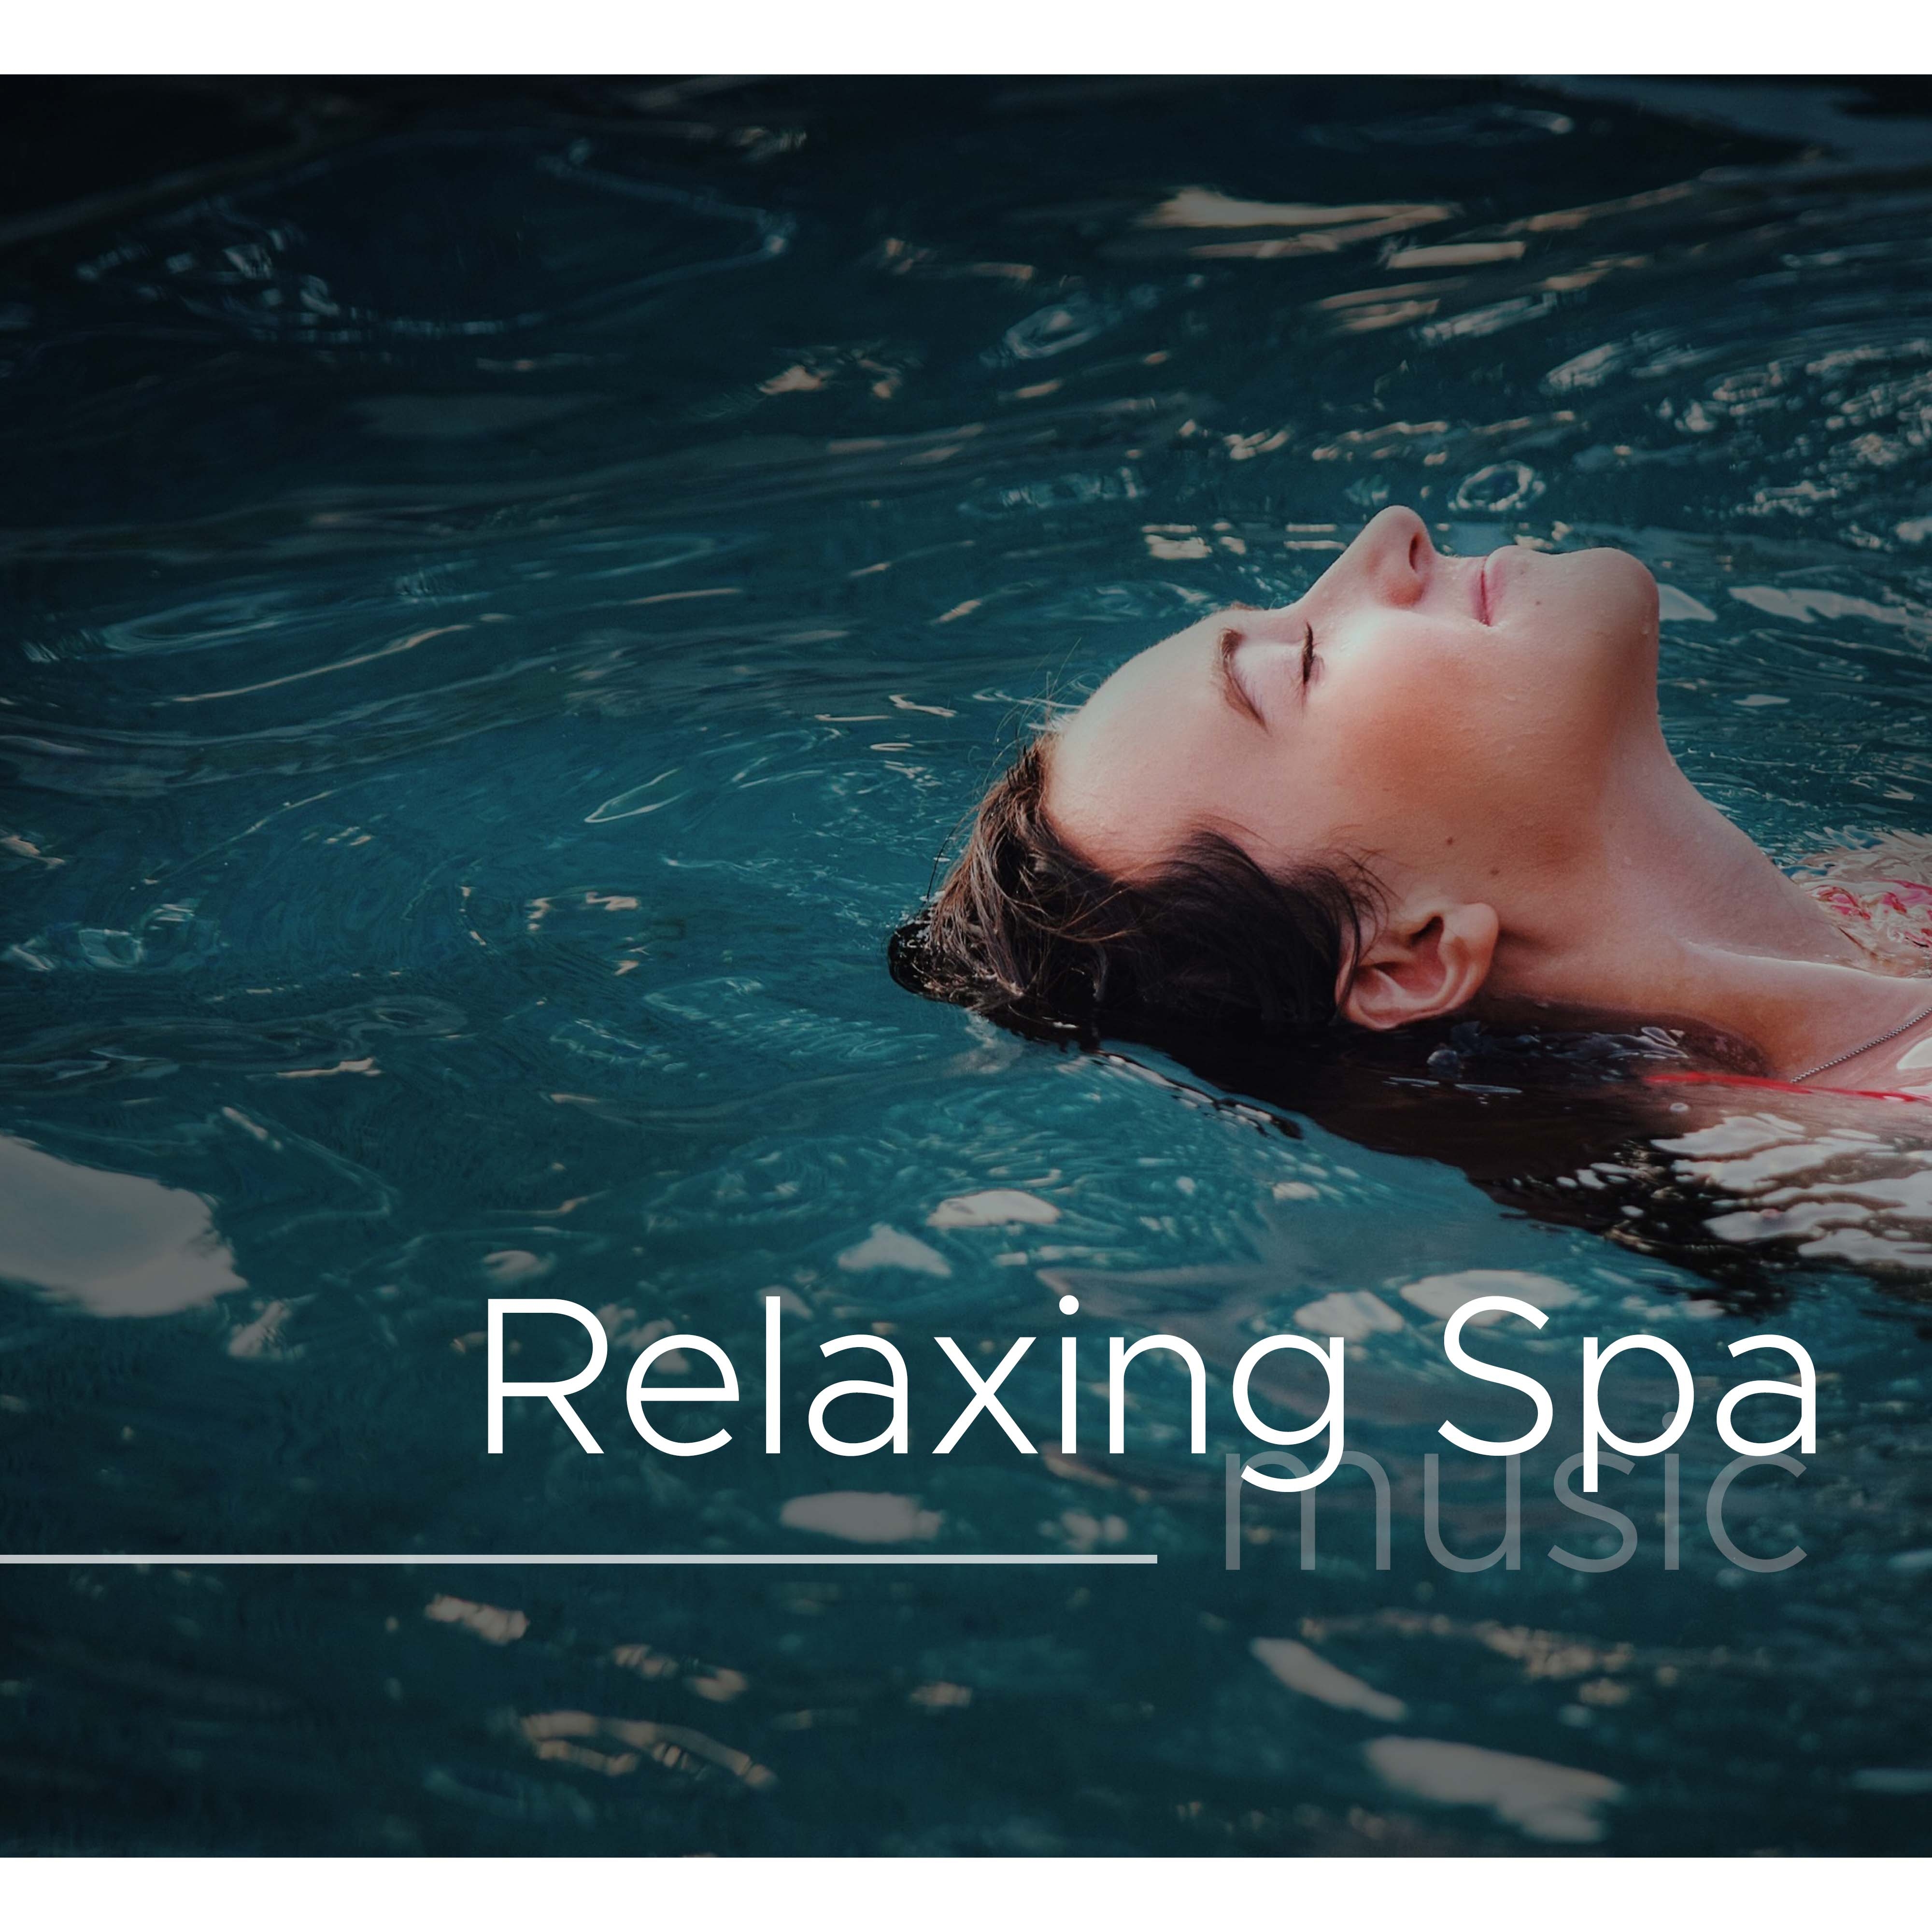 Best Relaxing SPA Music